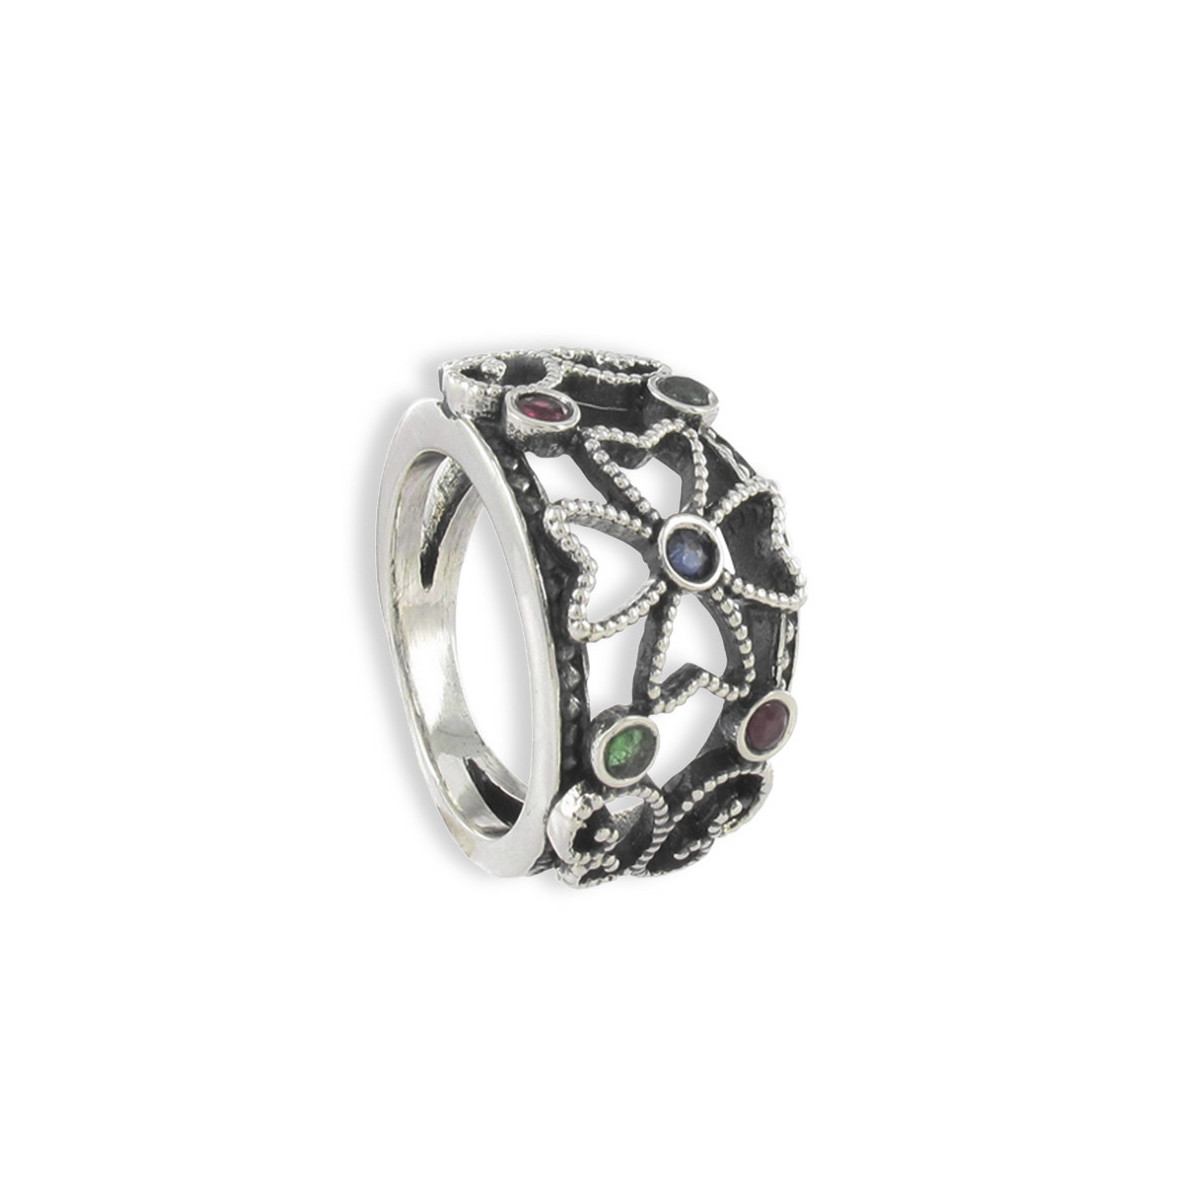 SILVER RING AND COLORED PRECIOUS STONES